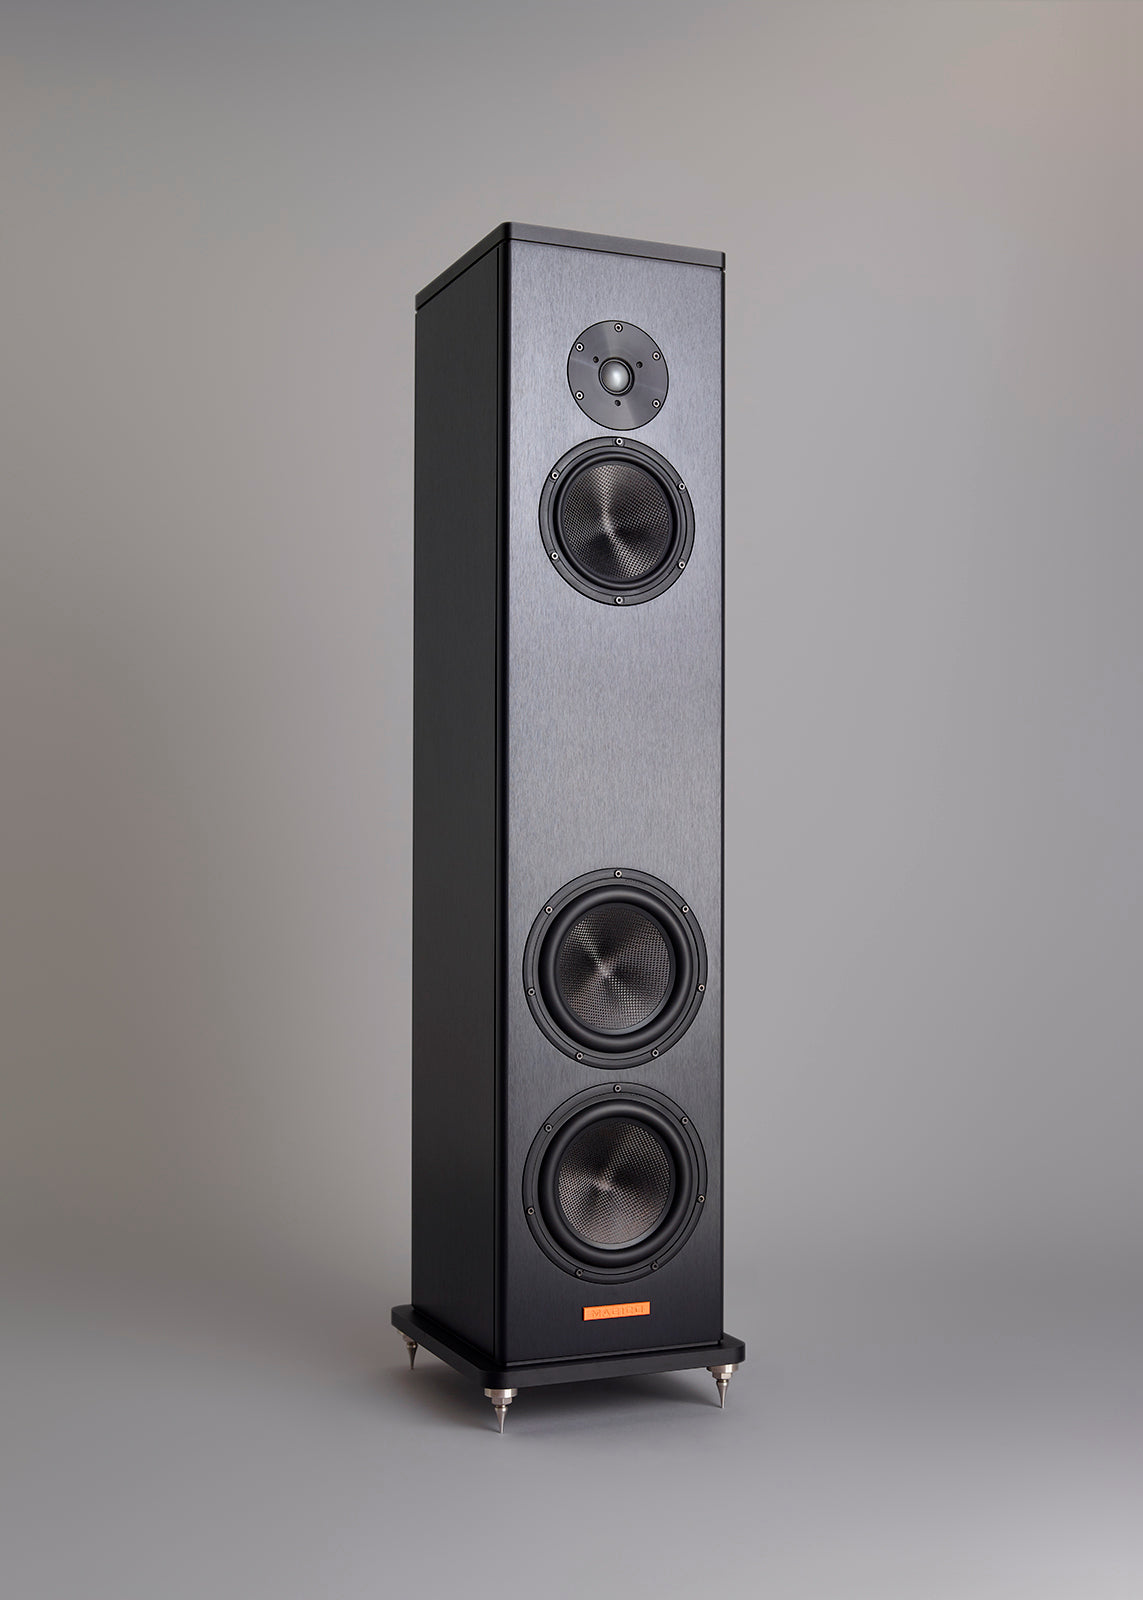 The inspiration for the new A3 was driven by the engineering challenge to create not only a full range loudspeaker that incorporates similar design philosophies found in higher-end Magico offerings but to provide an entry level category that is accessible to a new and wider audience of music enthusiasts. (89 kg)